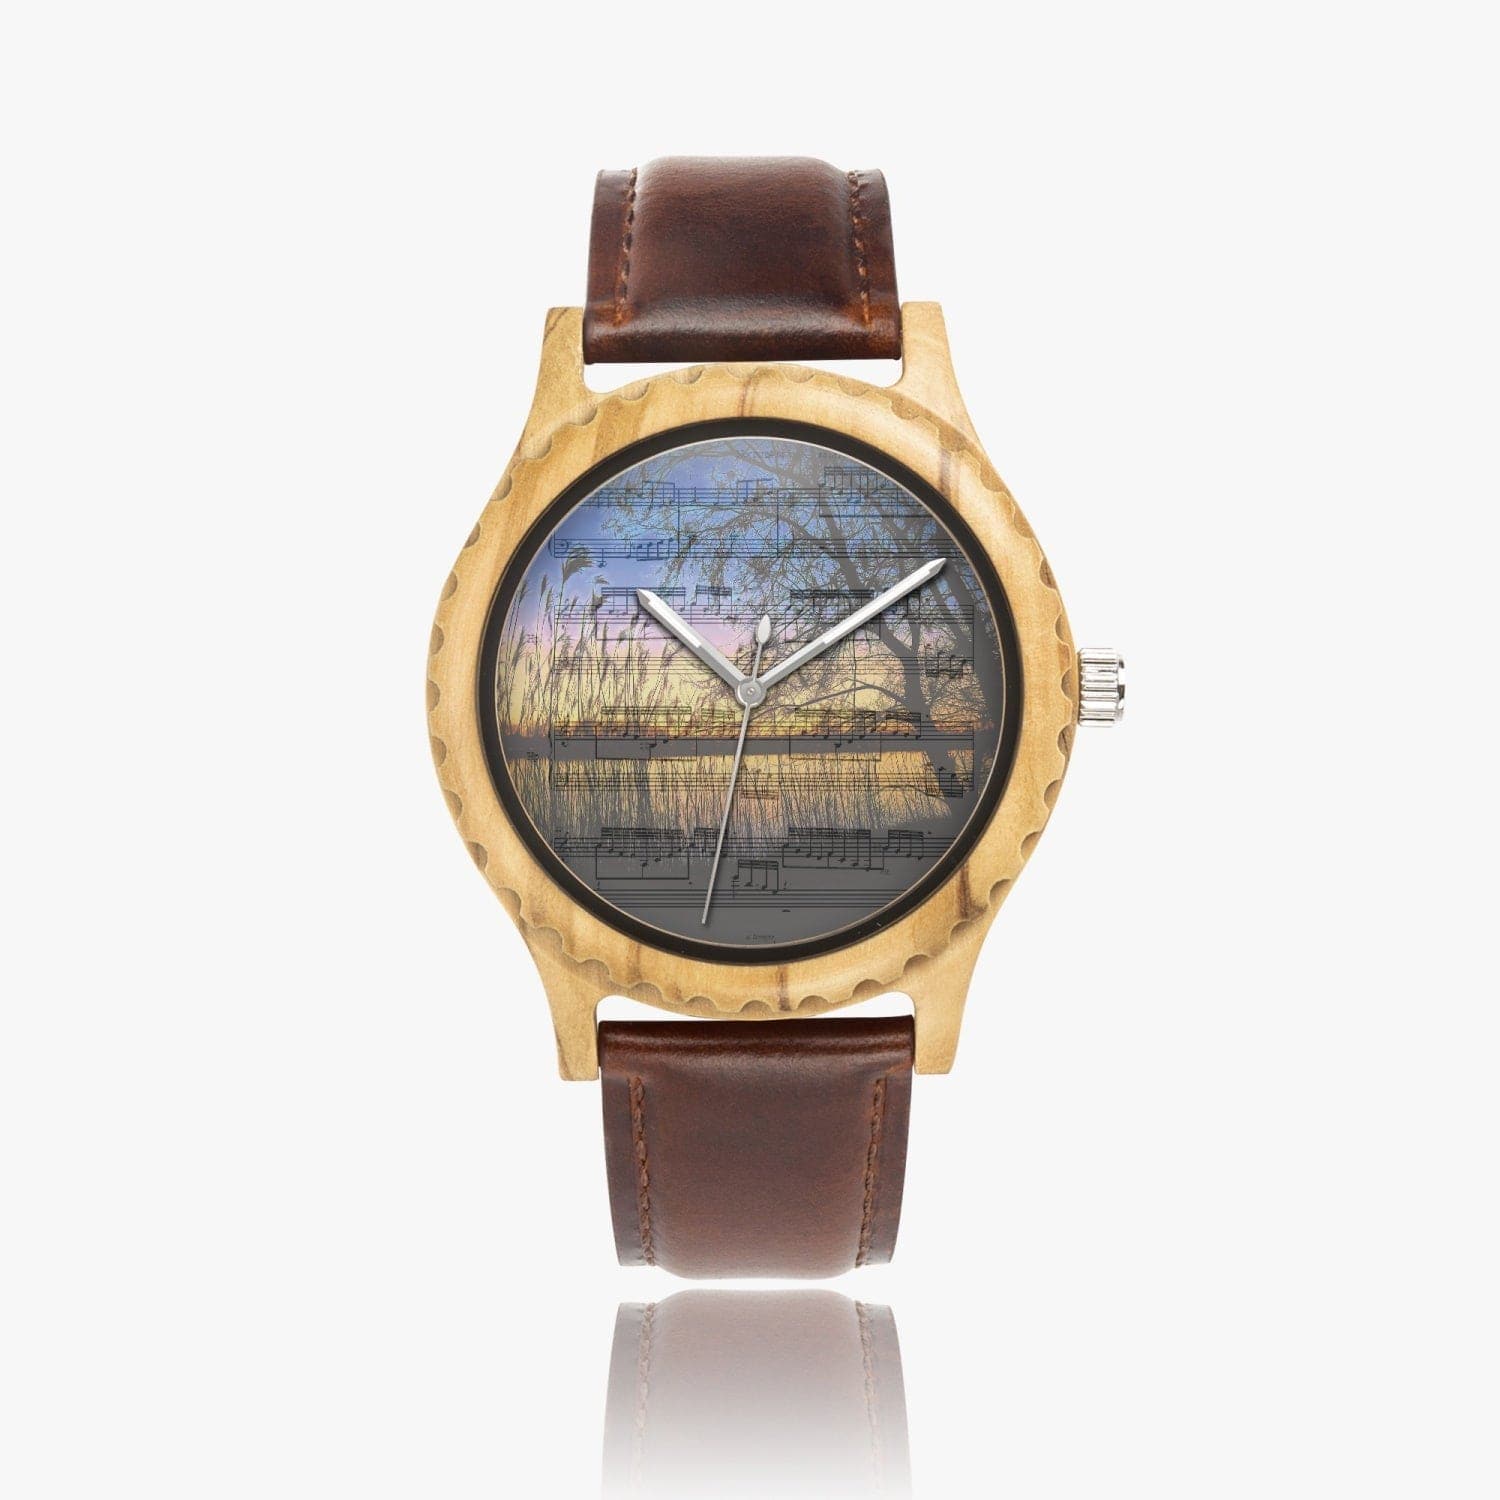 Tango in the dawn. Italian Olive Lumber Wooden Watch - Leather Strap. Designer watch by Sensus Studio Design